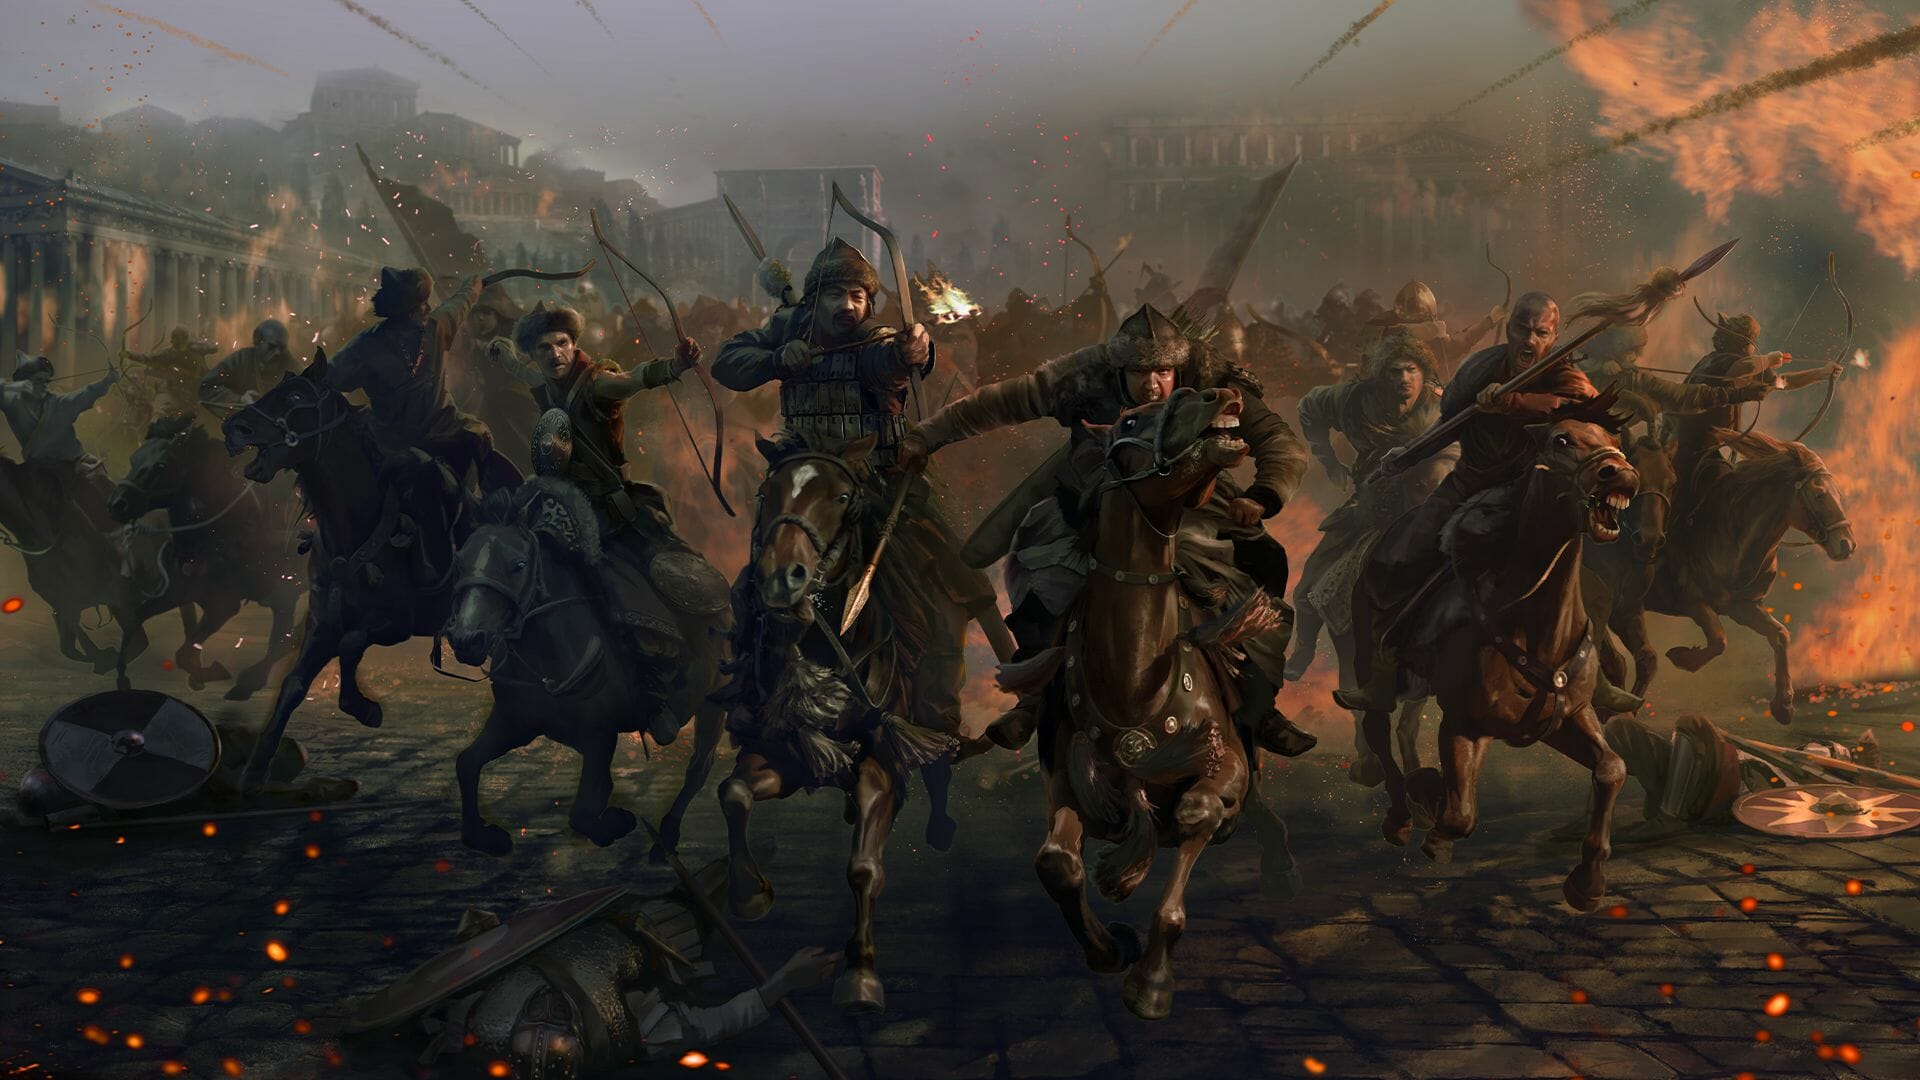 Image for Save 70% or more on Total War games in the Total War promo at Games Planet